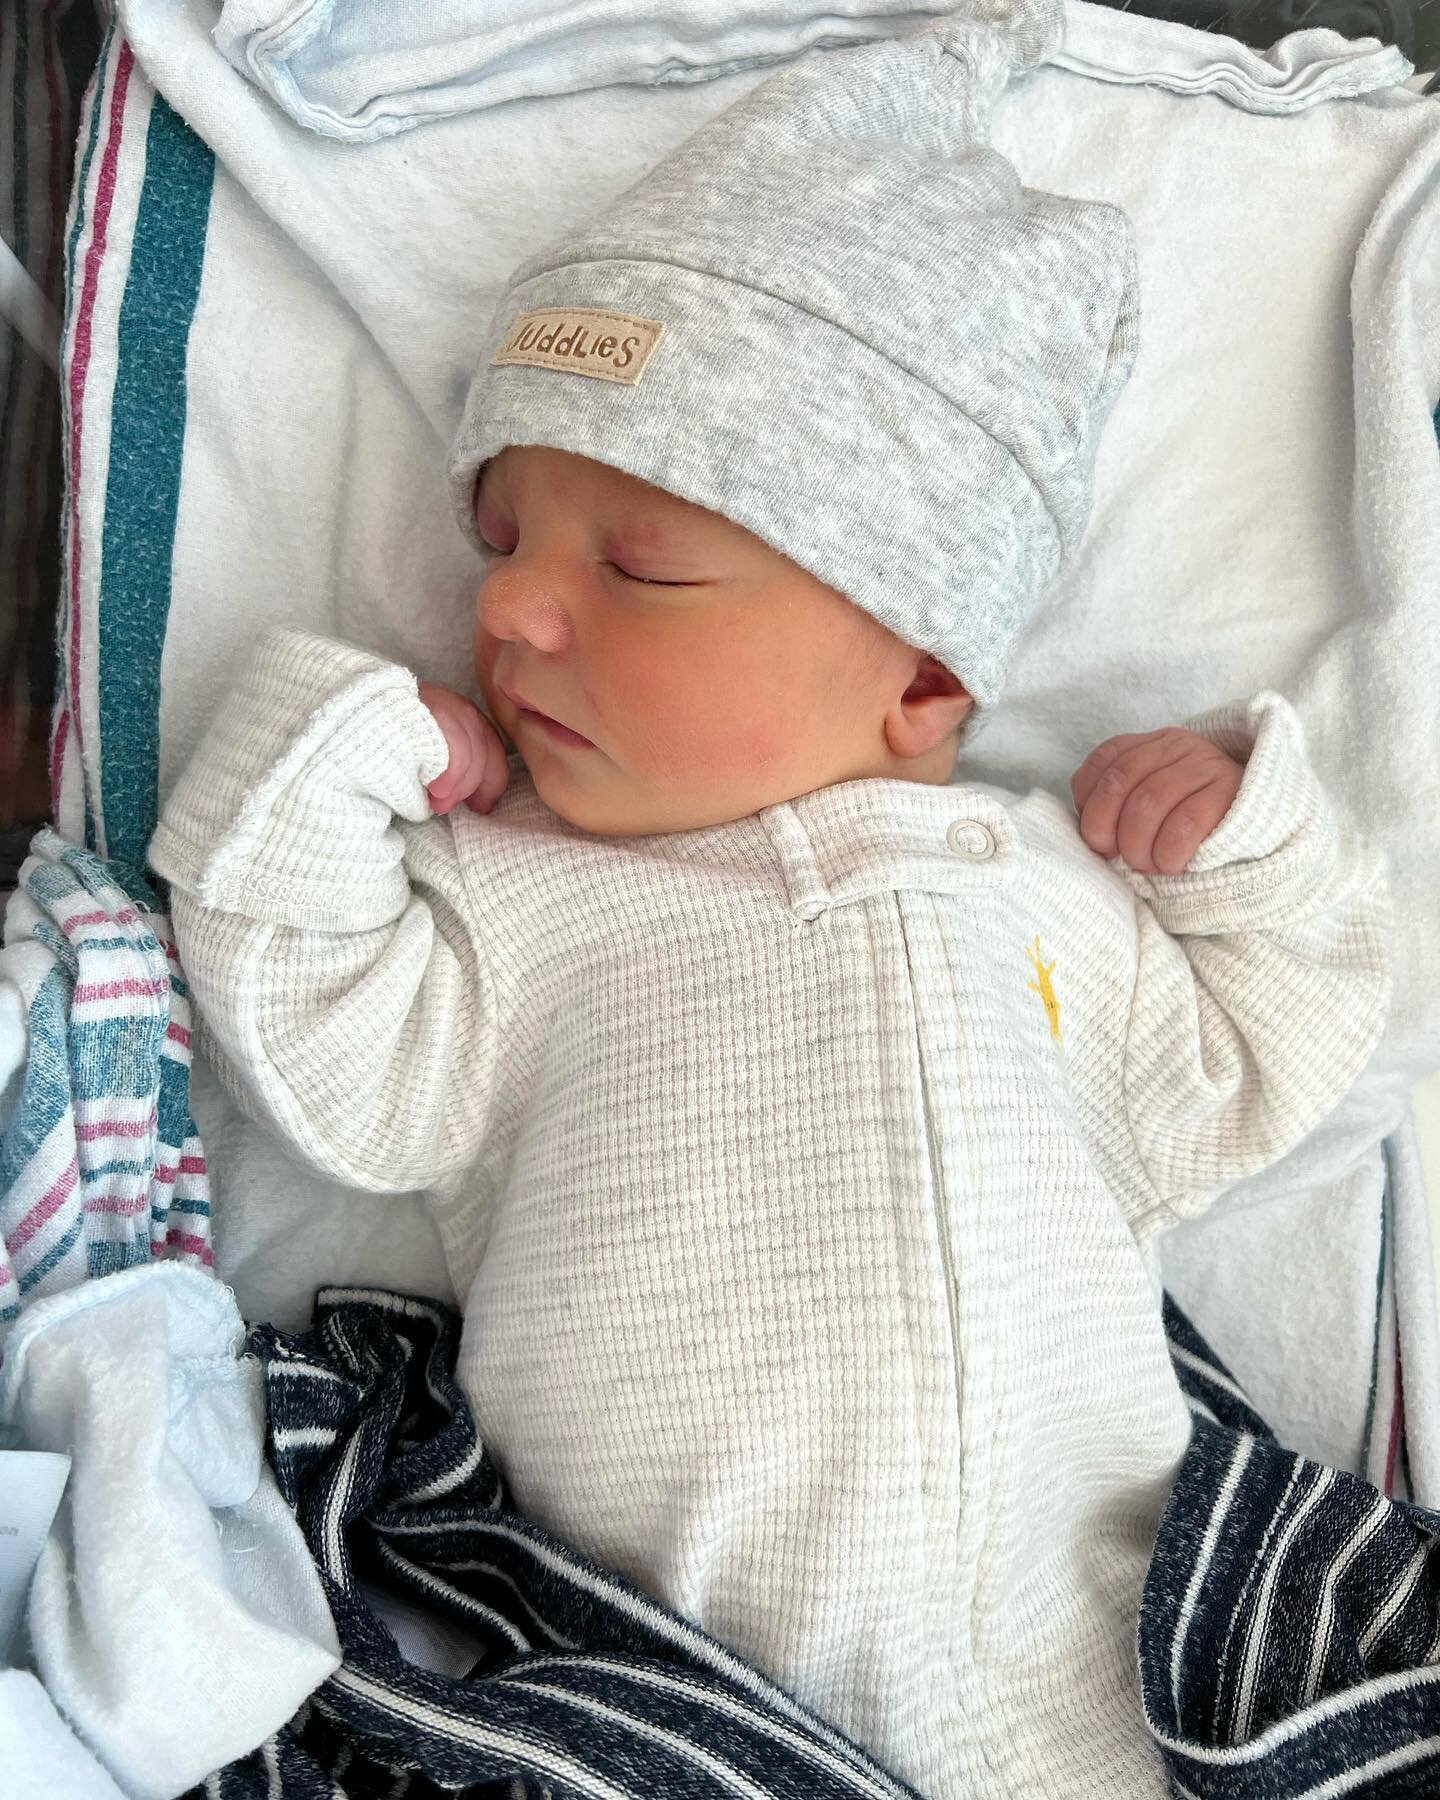 Our little bub has arrived! Daniel Alexander was born earlier this week, on August 18th, at 7lbs. 7oz. He loves cuddling with mama and papa and has the cutest little voice that has us crying basically all the time. We&rsquo;re so happy you&rsquo;re o